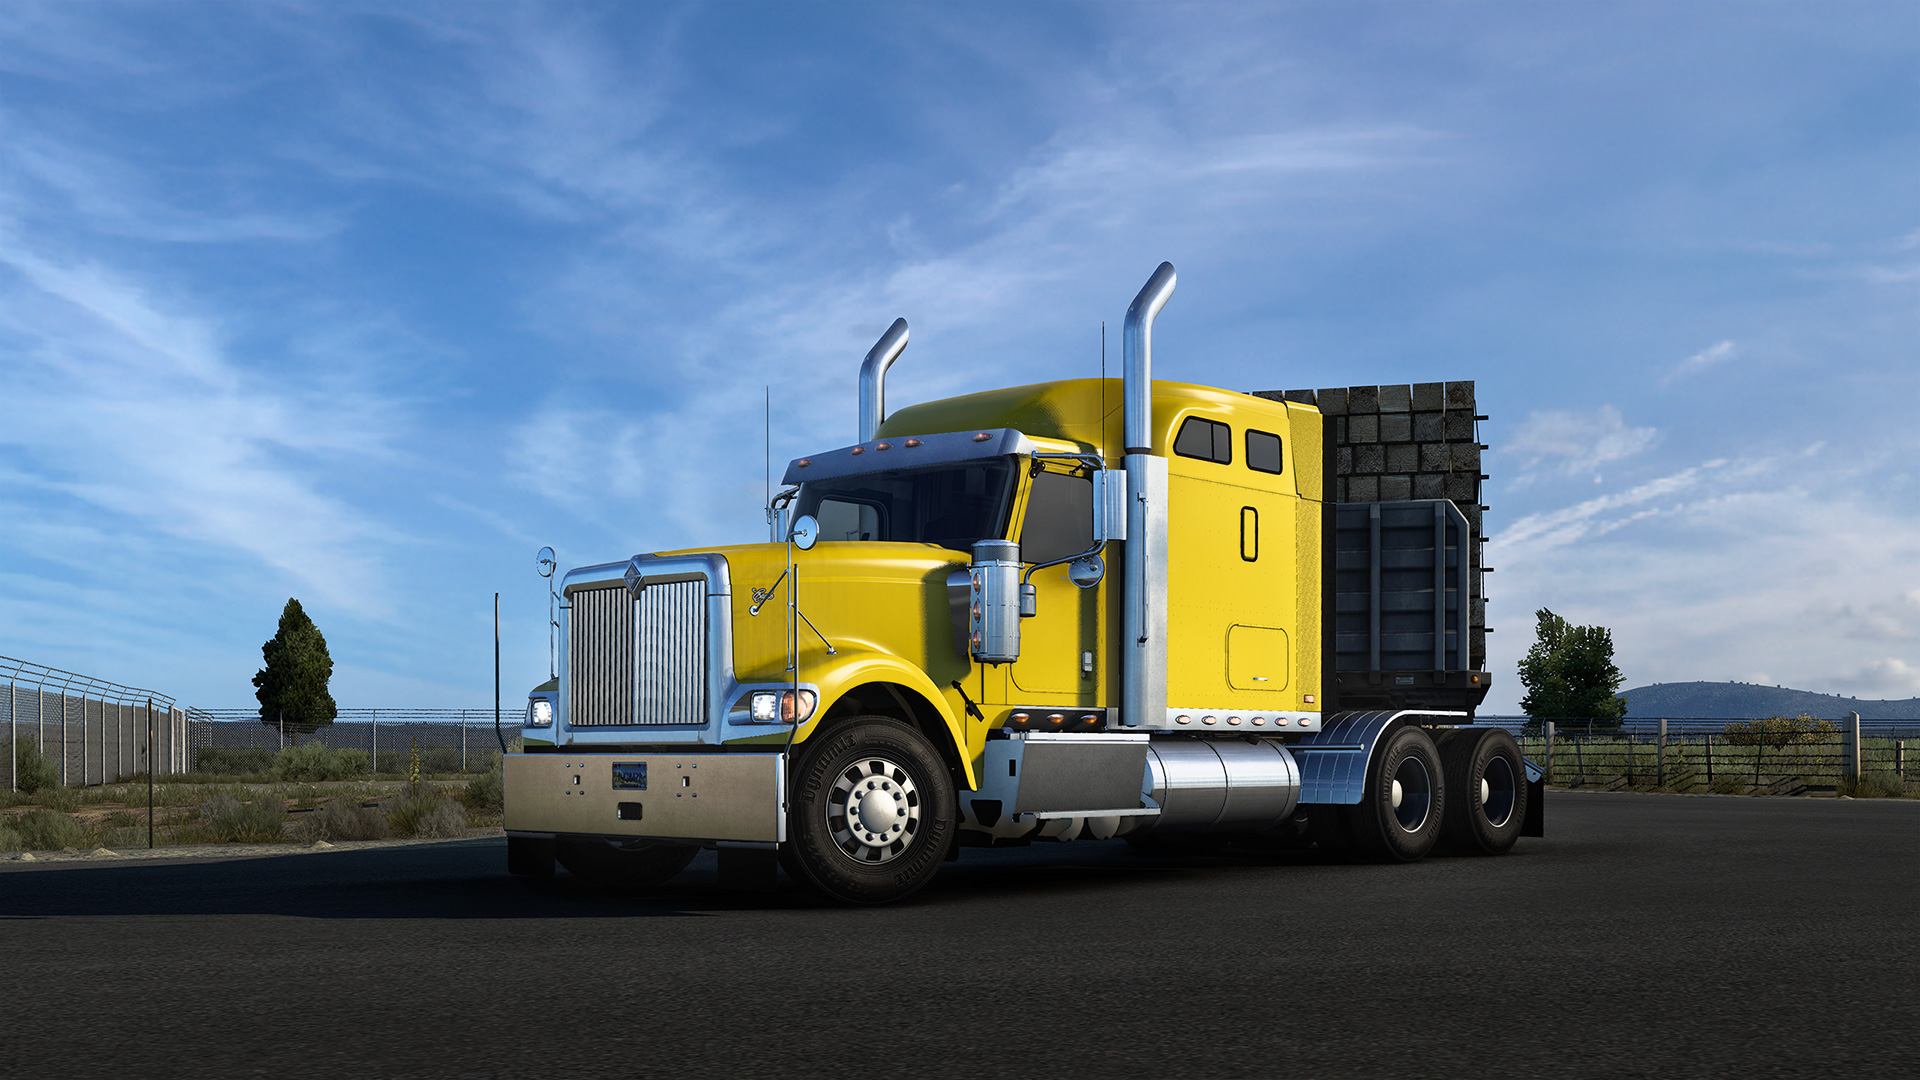 American Truck Simulator brings a truck back from the dead